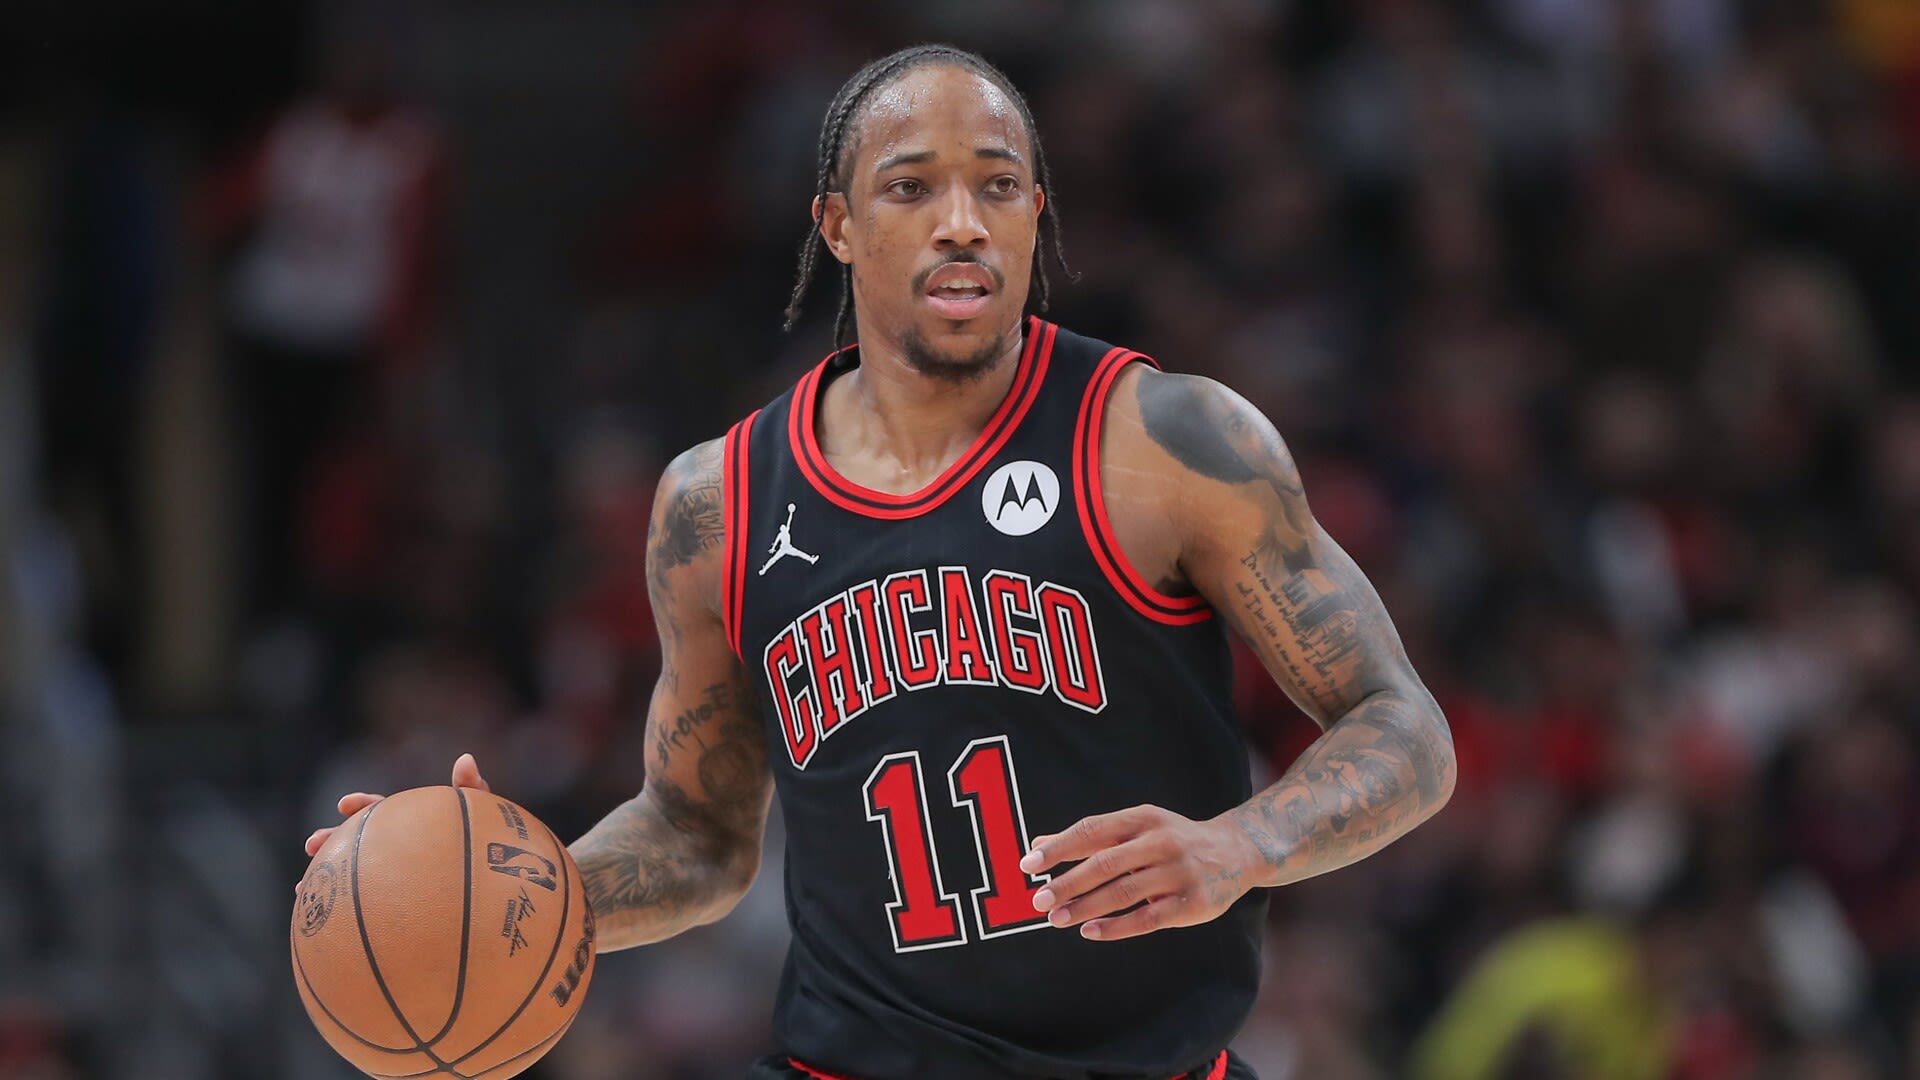 Report: Bulls offered DeMar DeRozan two-year deal worth up to $80 million, he's pushing for more years